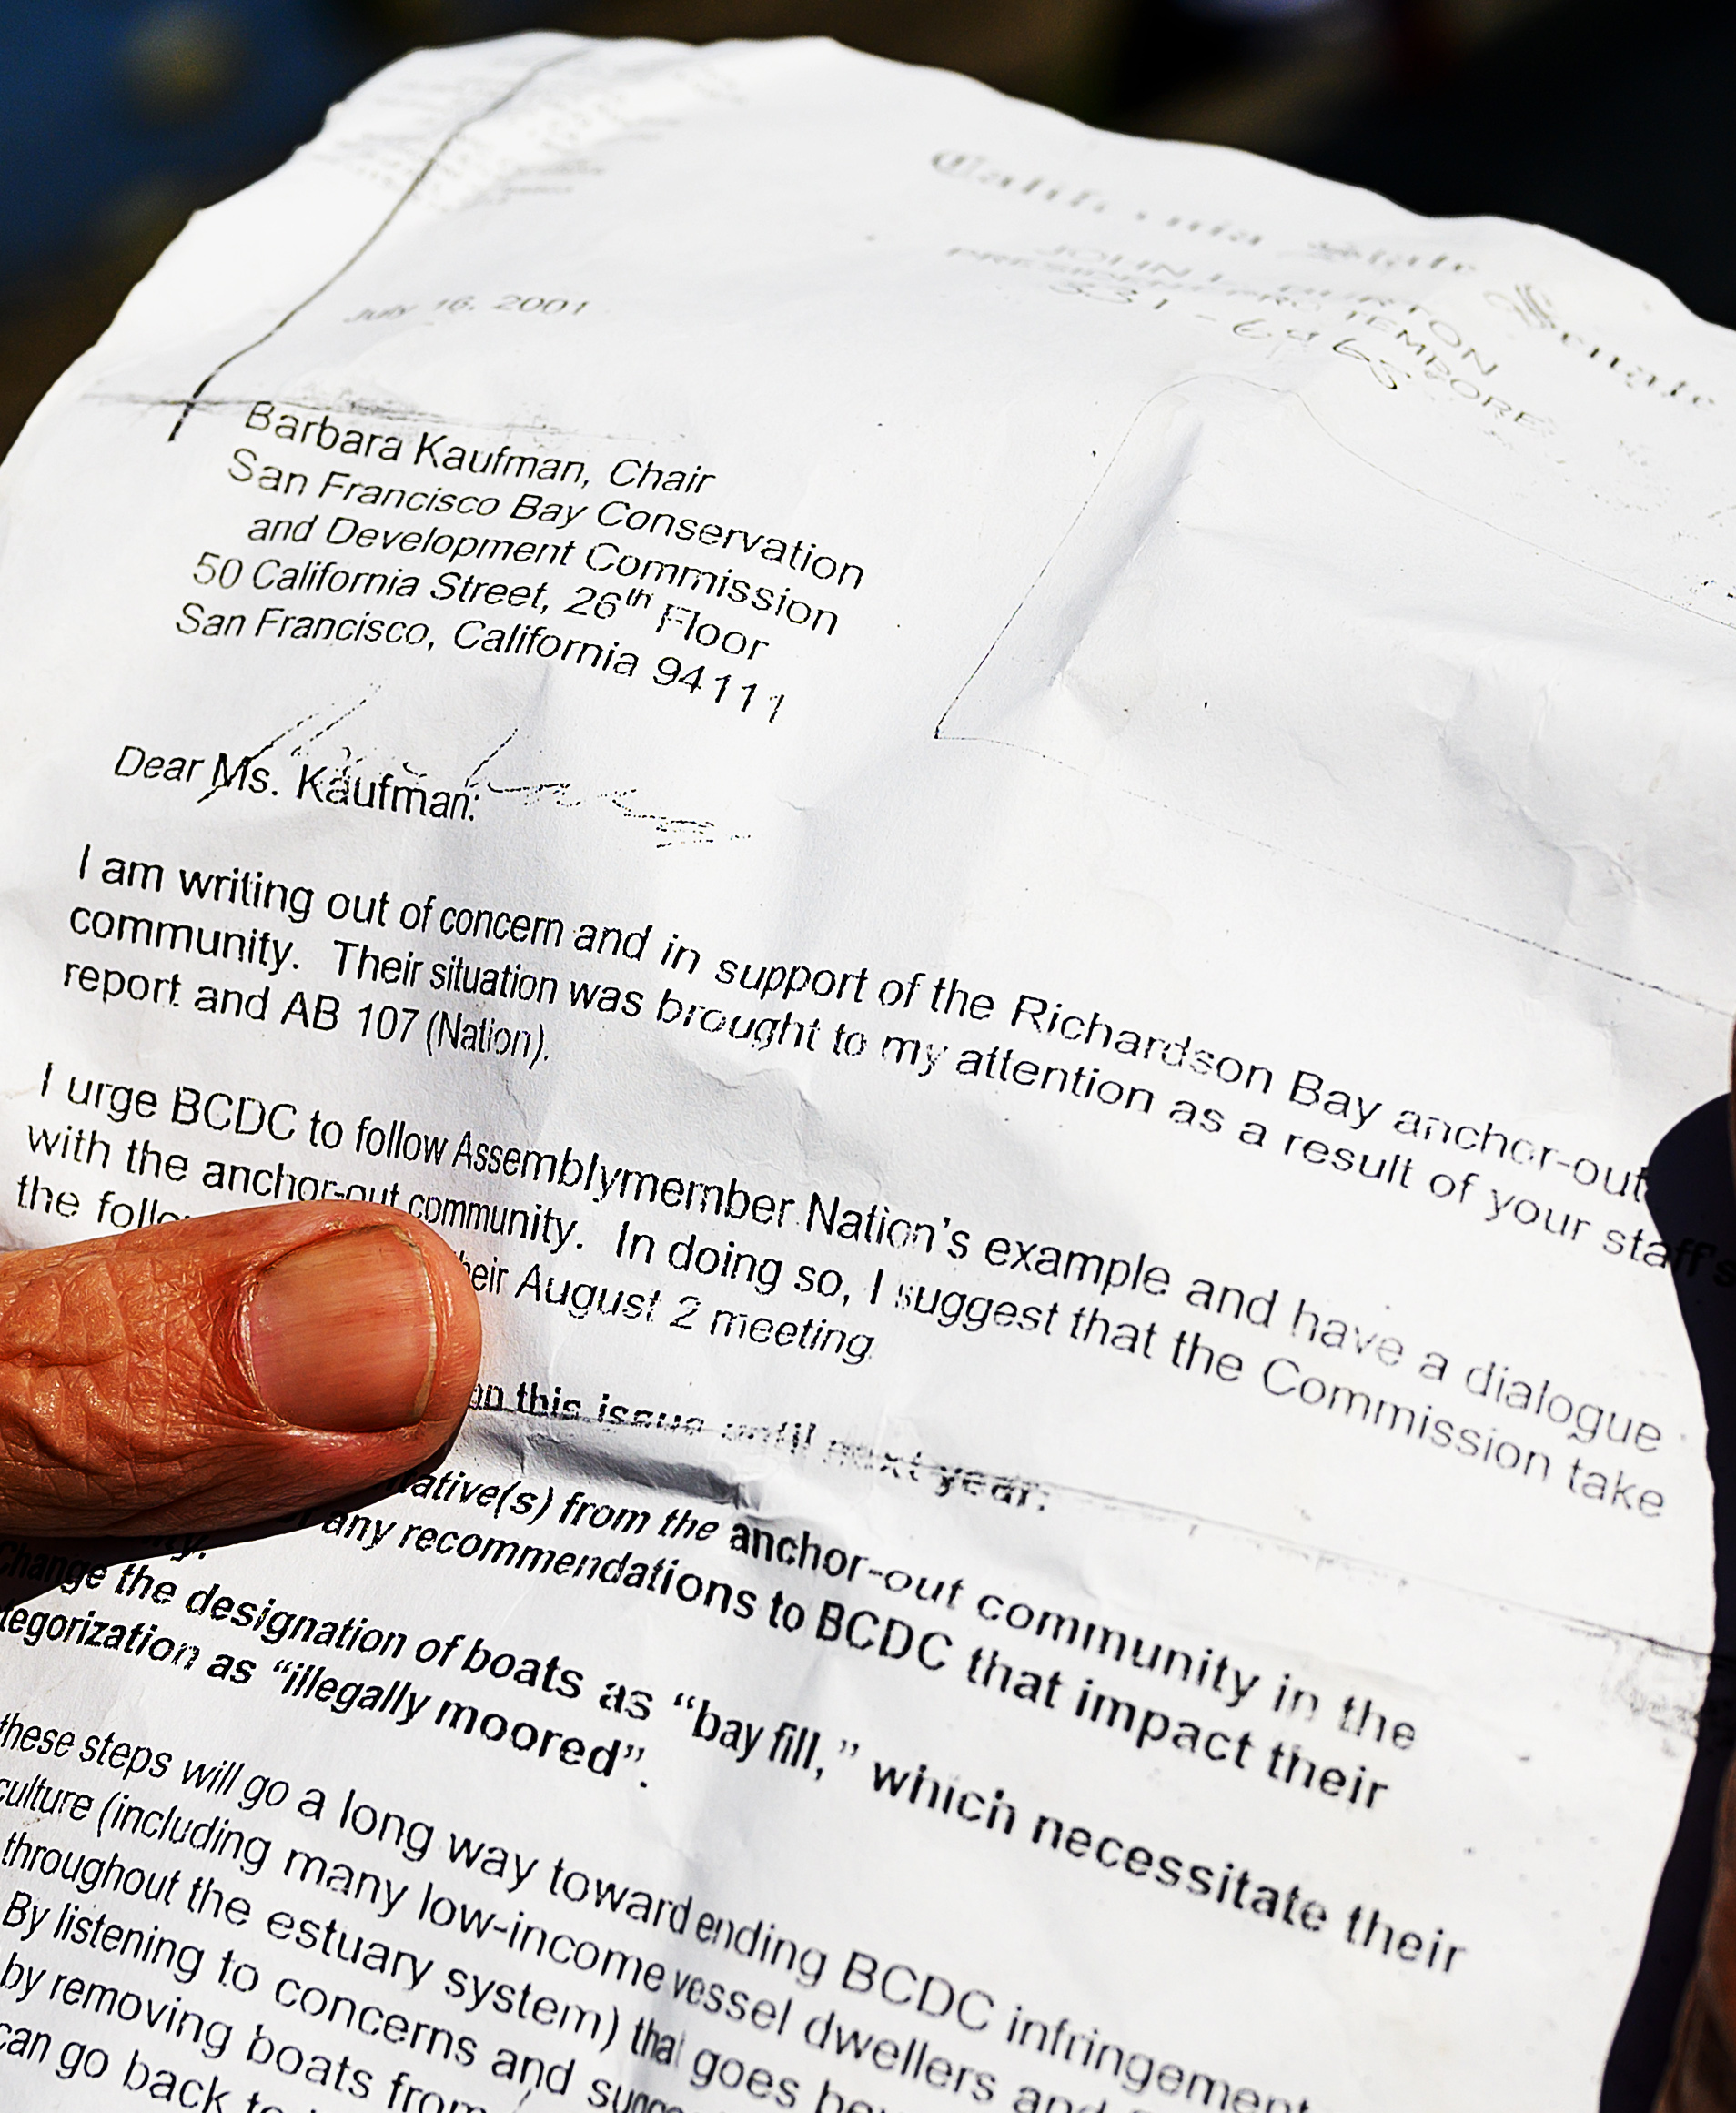 A wrinkled letter is held by a hand, addressed to Barbara Kaufman regarding concerns for the Richardson Bay anchor-out community.